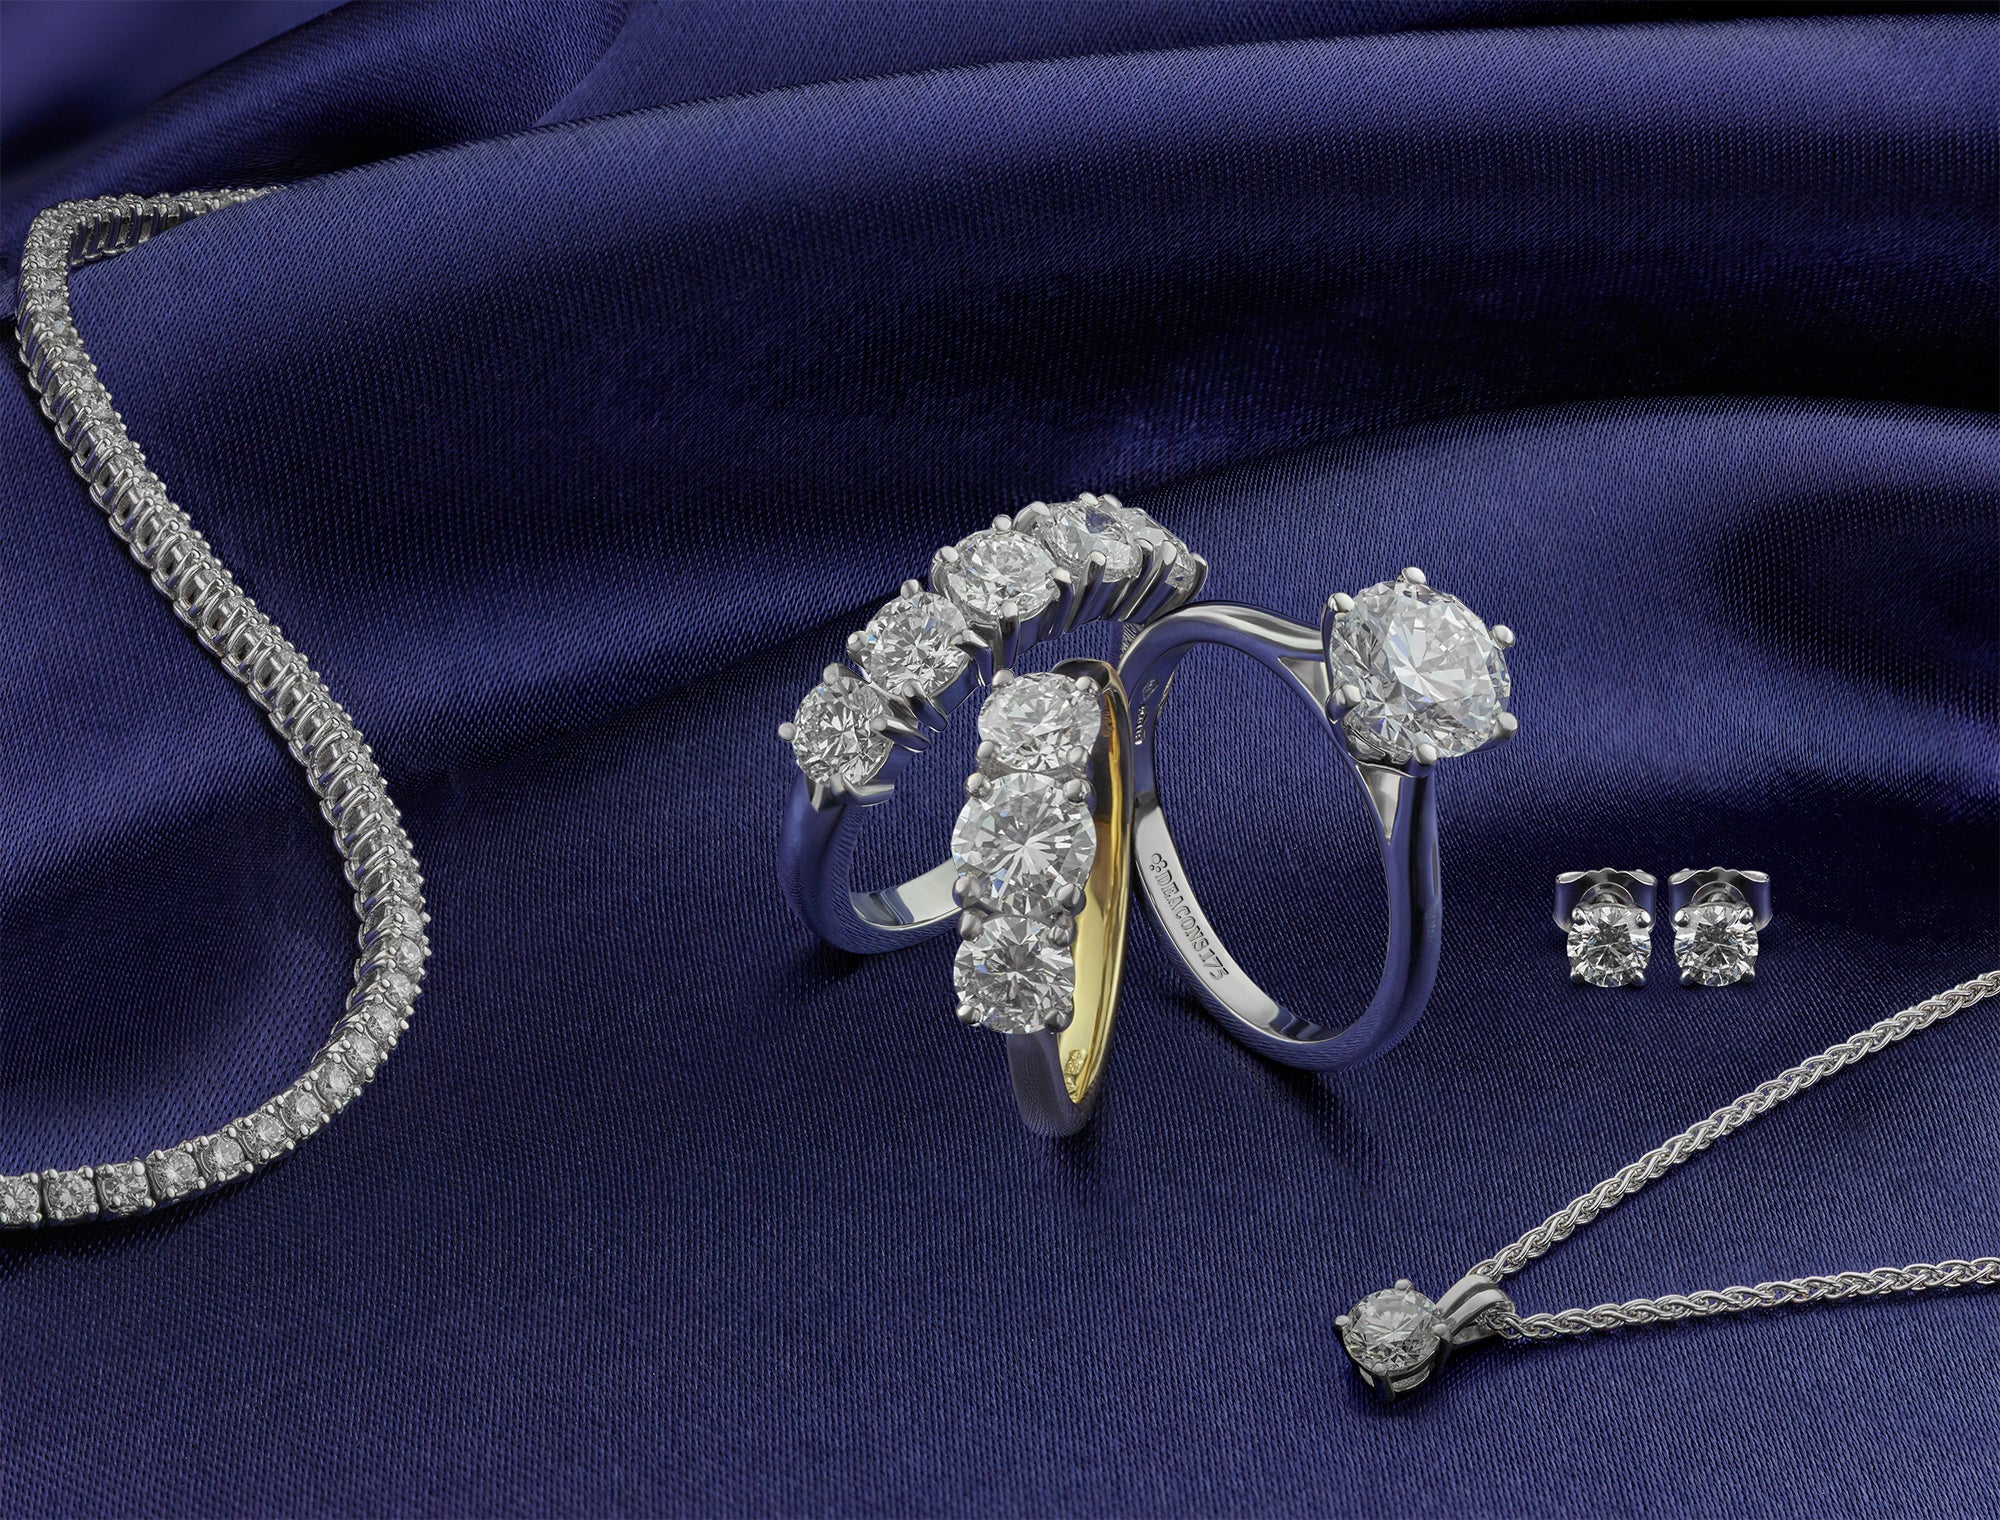 Jewellery photography for retailers